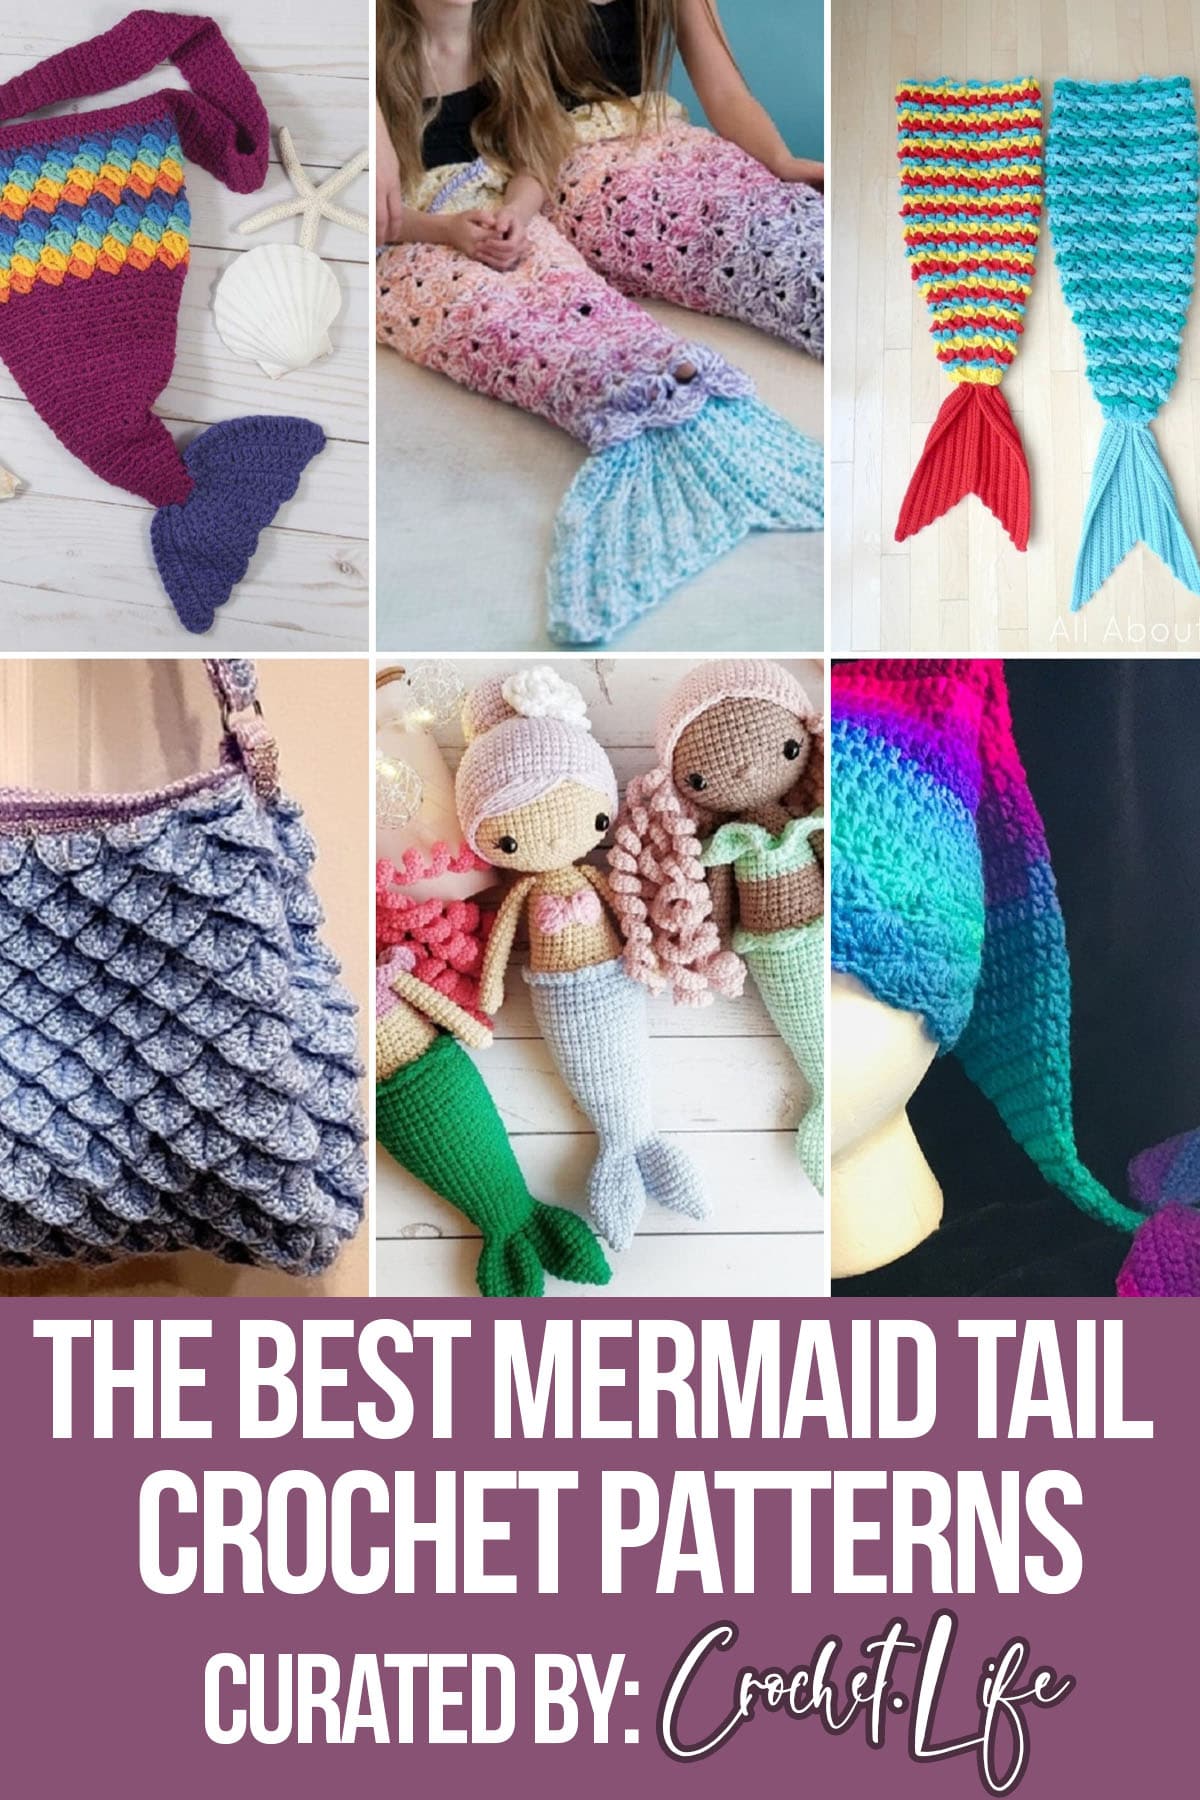 photo collage of mermaid crochet patterns with text which reads the best mermaid tail crochet patterns curated by crochet.life